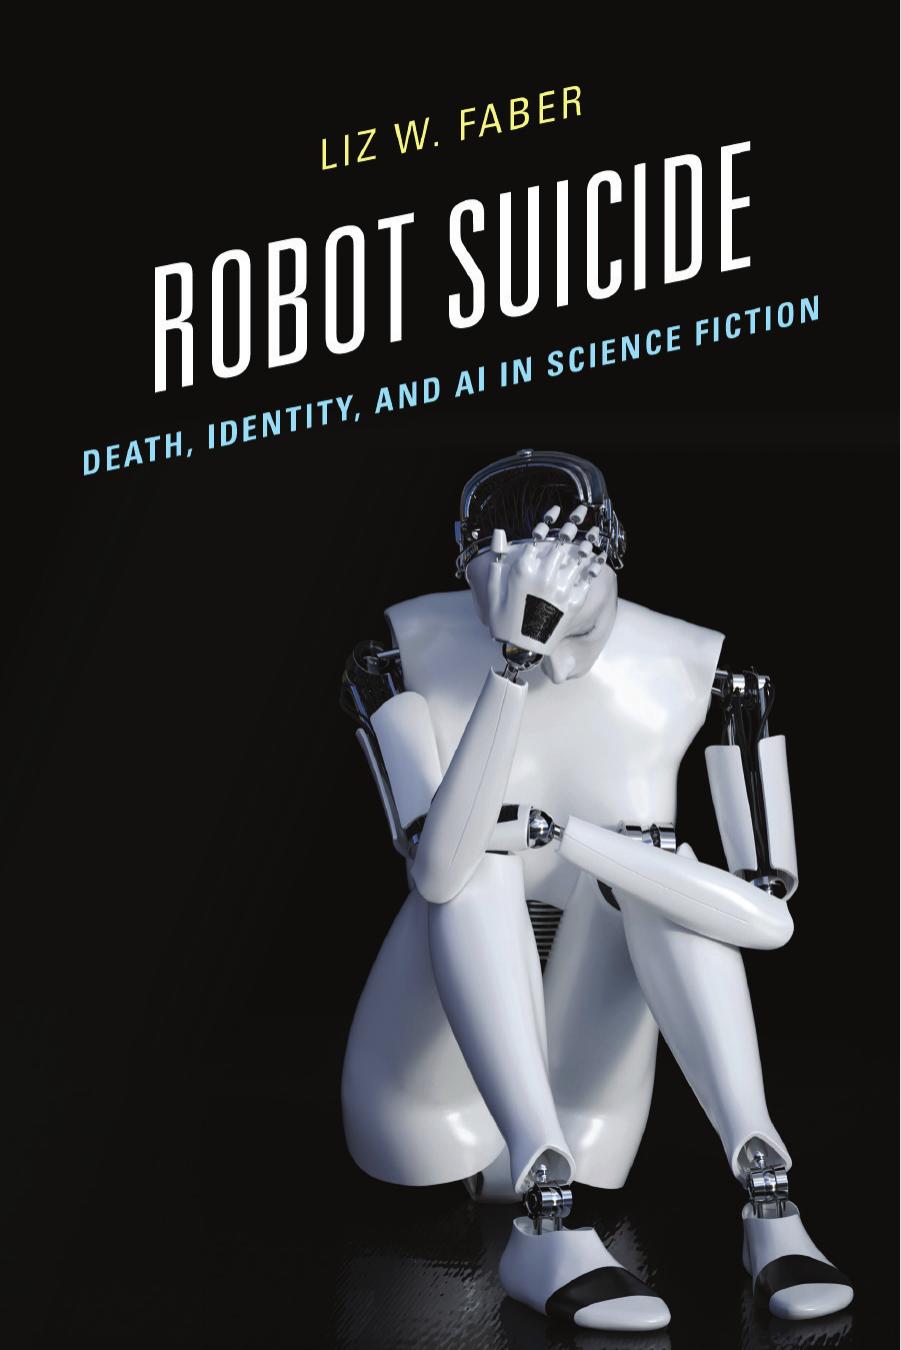 Robot Suicide: Death, Identity, and AI in Science Fiction by Liz W. Faber